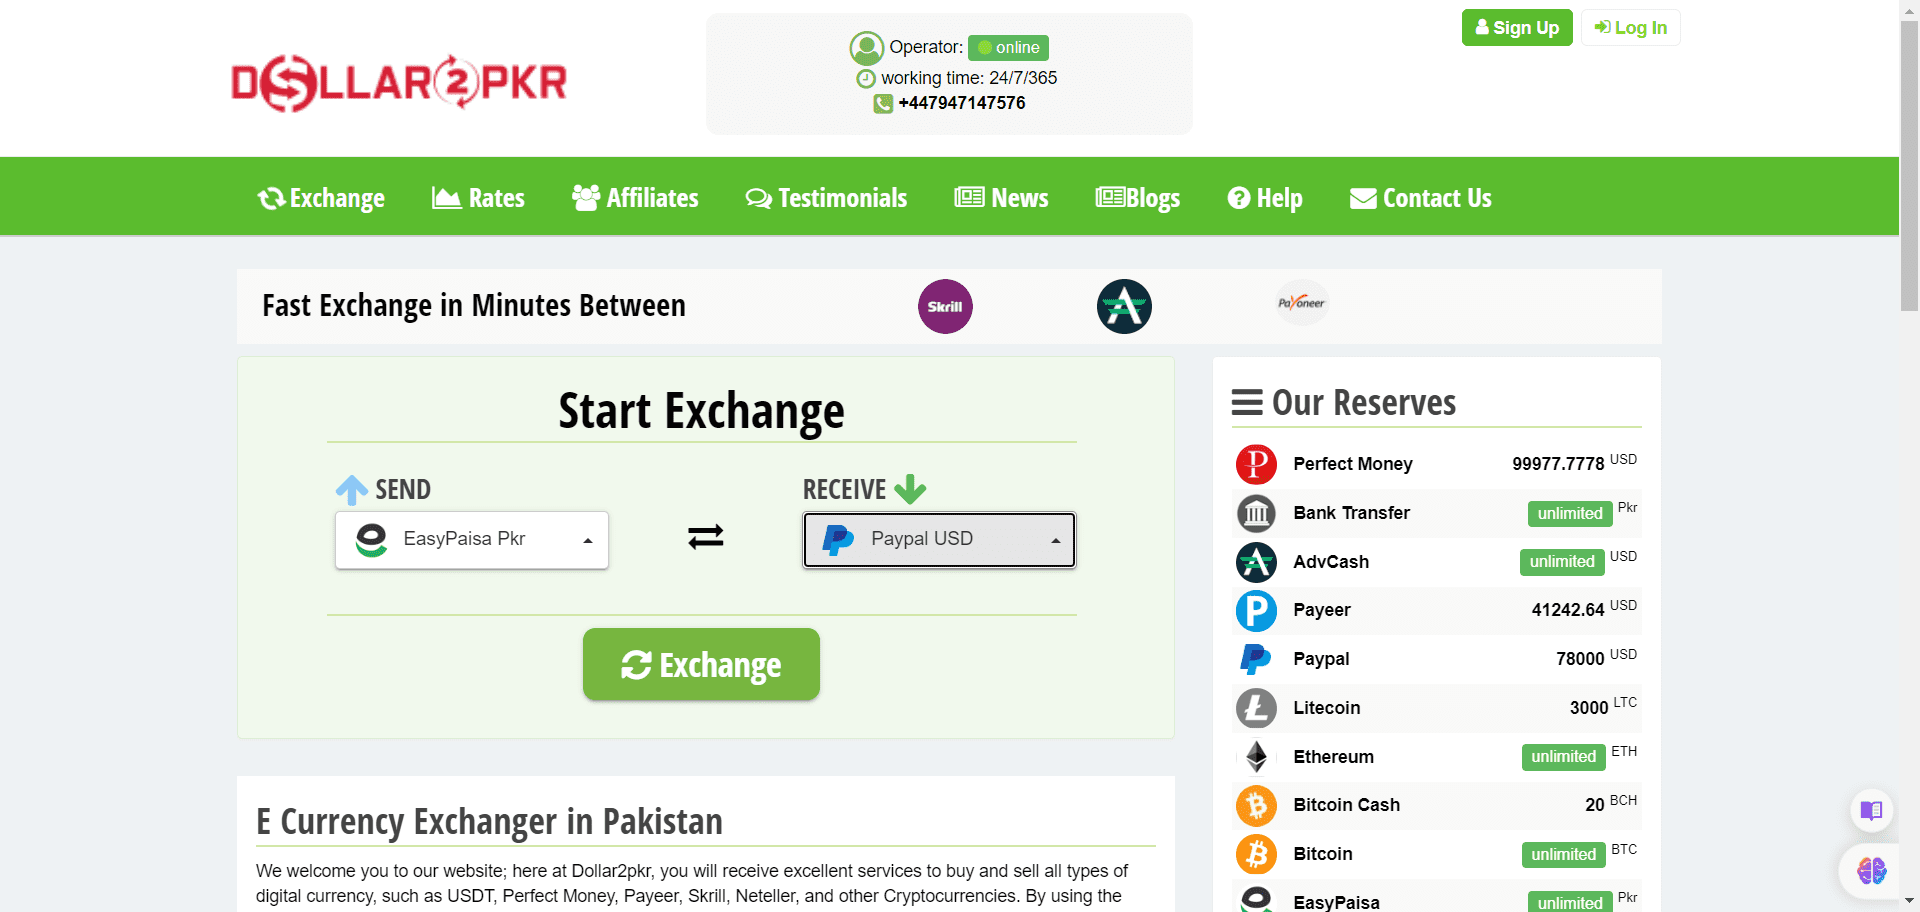 Best-And-Trusted-E-Currency-Exchange-In-Pakistan-Dollar2Pkr